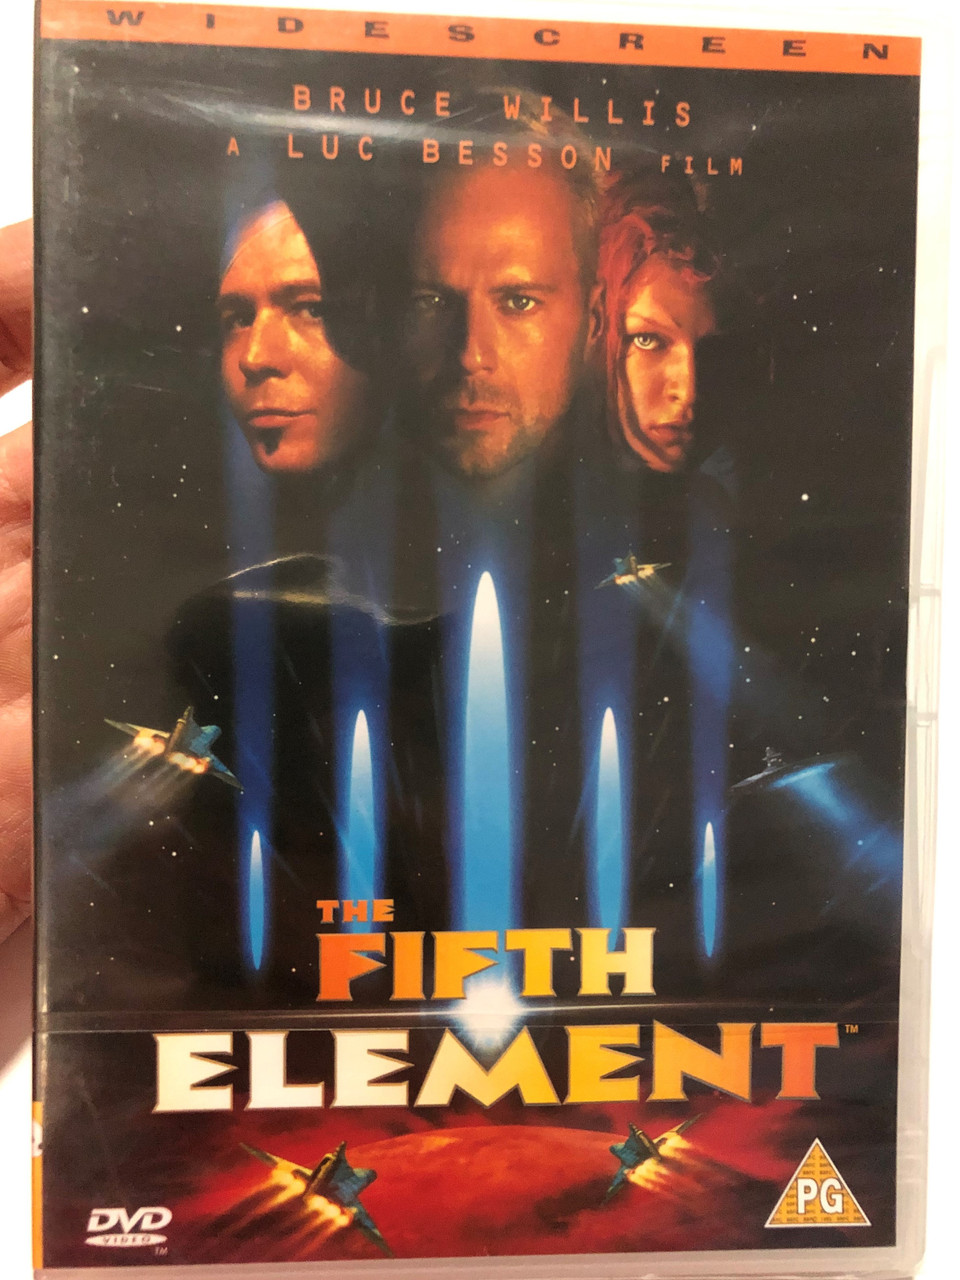 The Fifth Element DVD 1997 Widescreen edition / Directed by Luc Besson /  Starring: Bruce Willis, Milla Jovovich, Gary Oldman, Ian Holm -  bibleinmylanguage